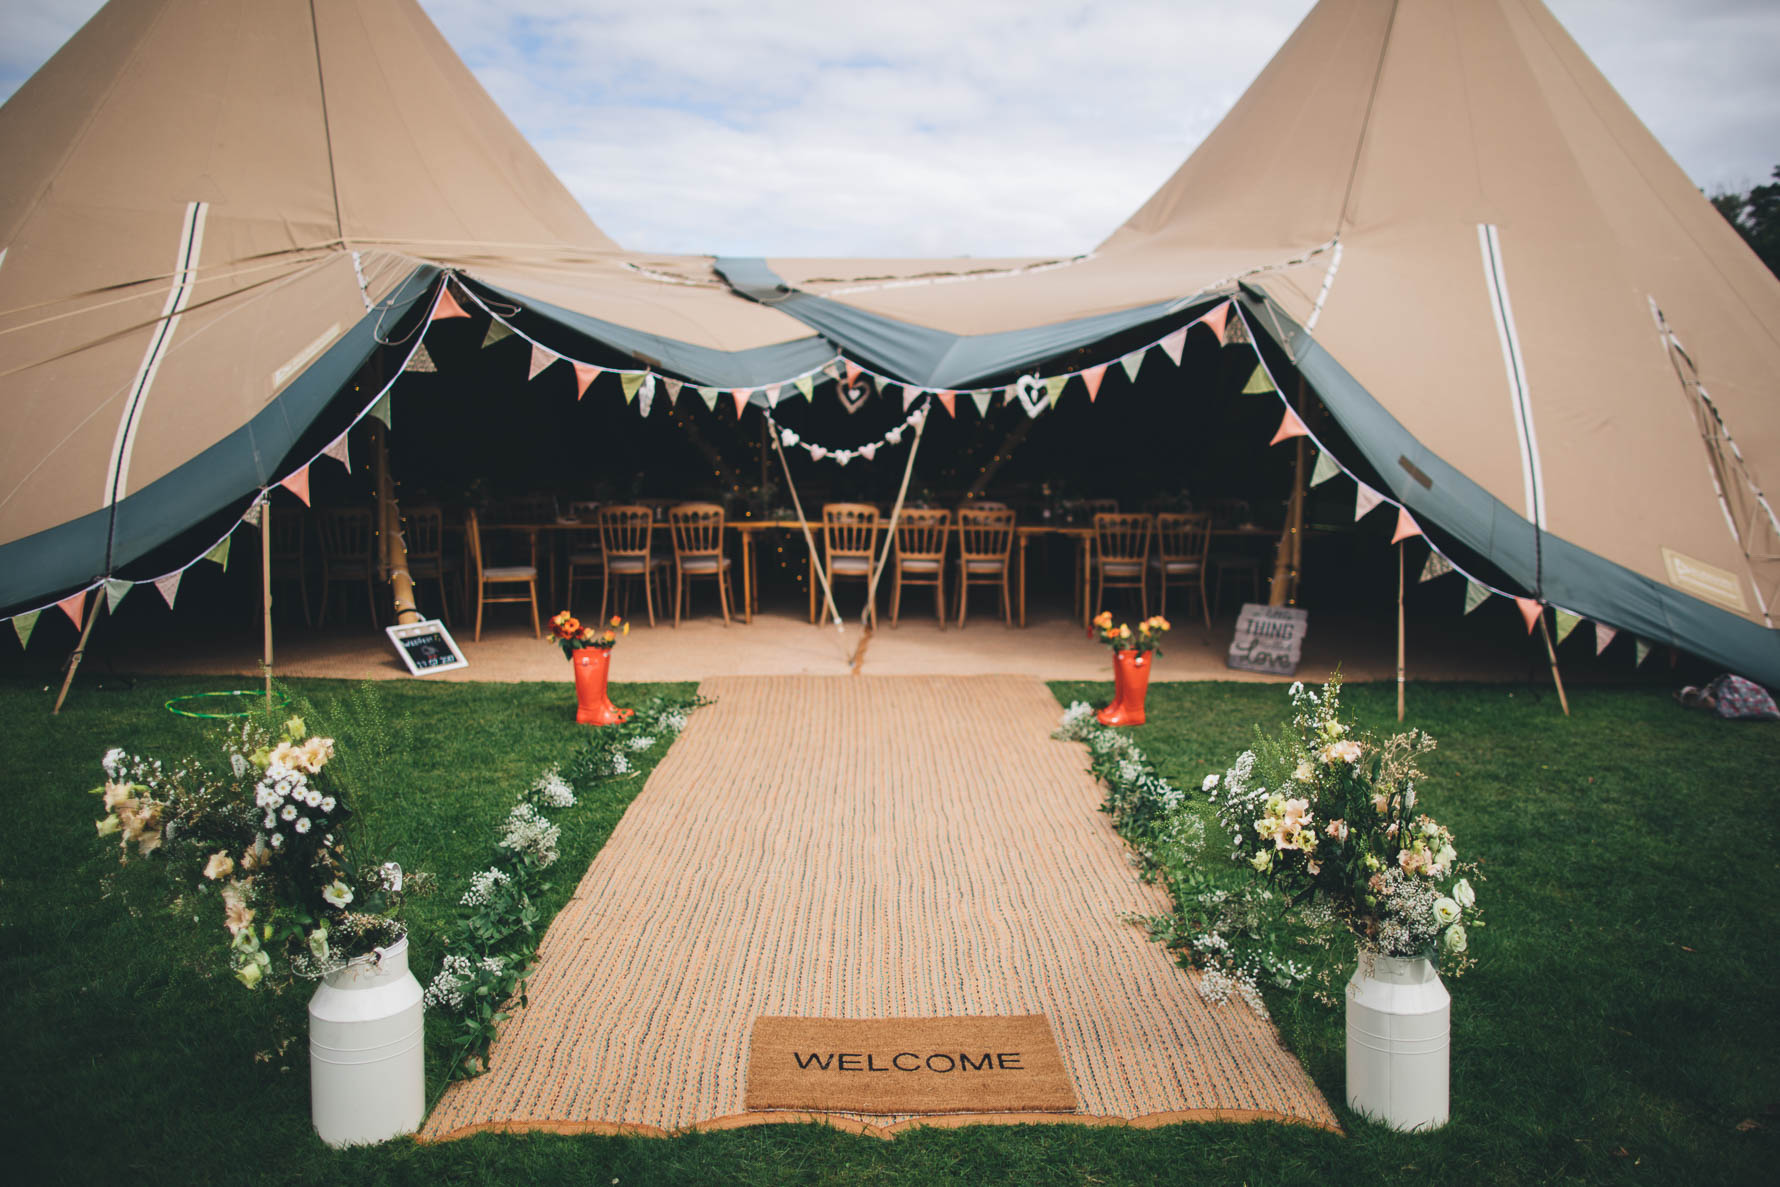 Entrance to a tipi set up for a wedding reception with a welcome mat and flowers at the entrance and bunting around the opening with tables and chairs inside